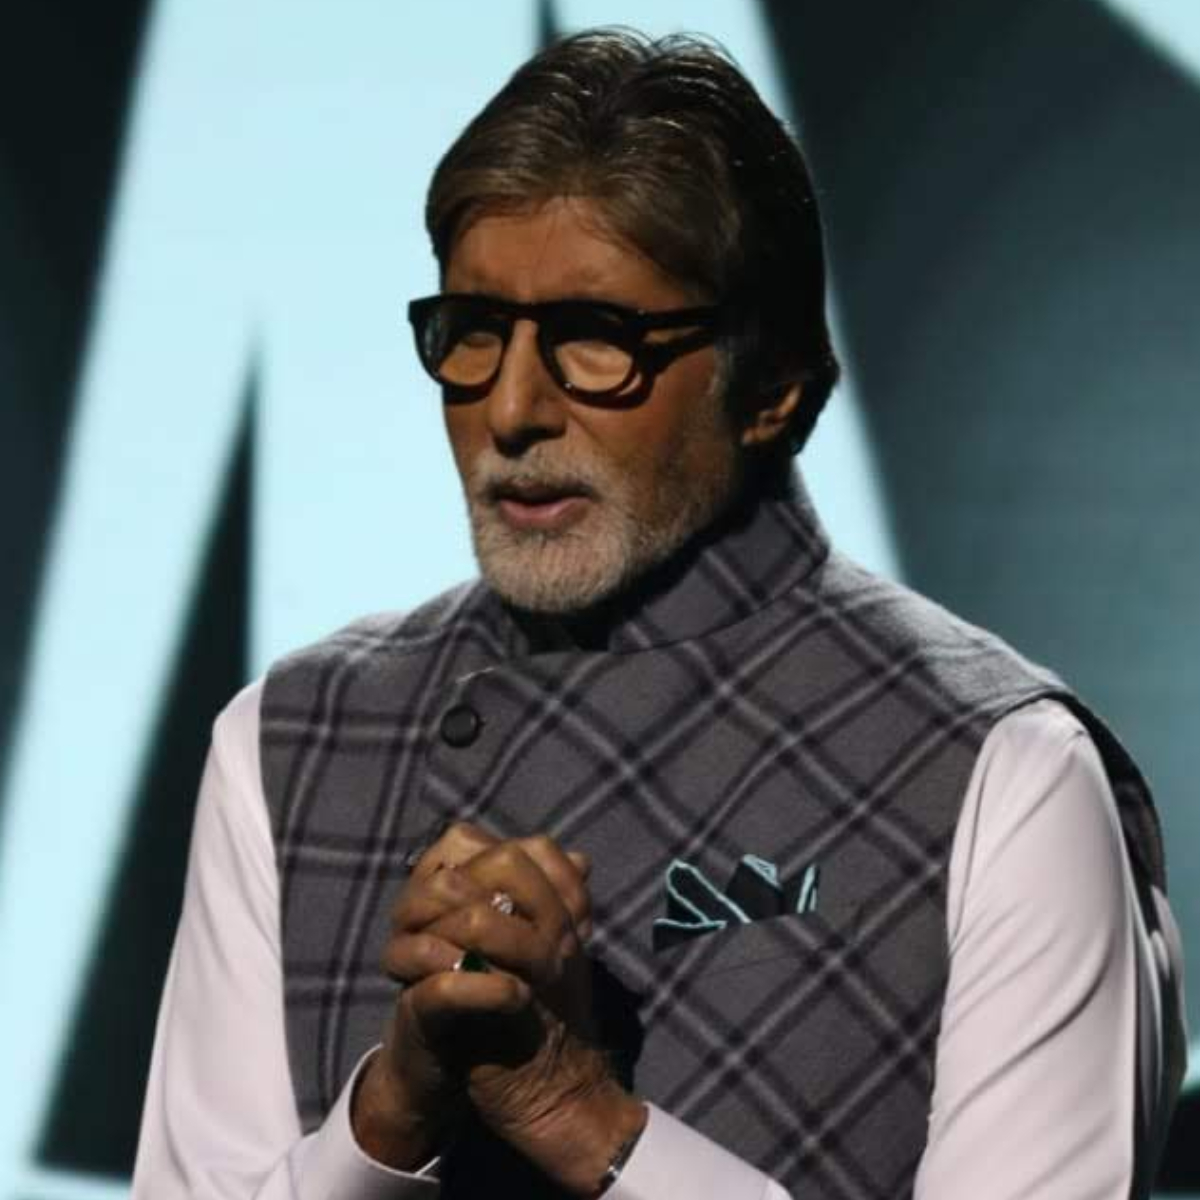 Exclusive: What made Amitabh Bachchan break into tears after hearing a song in Goodbye?